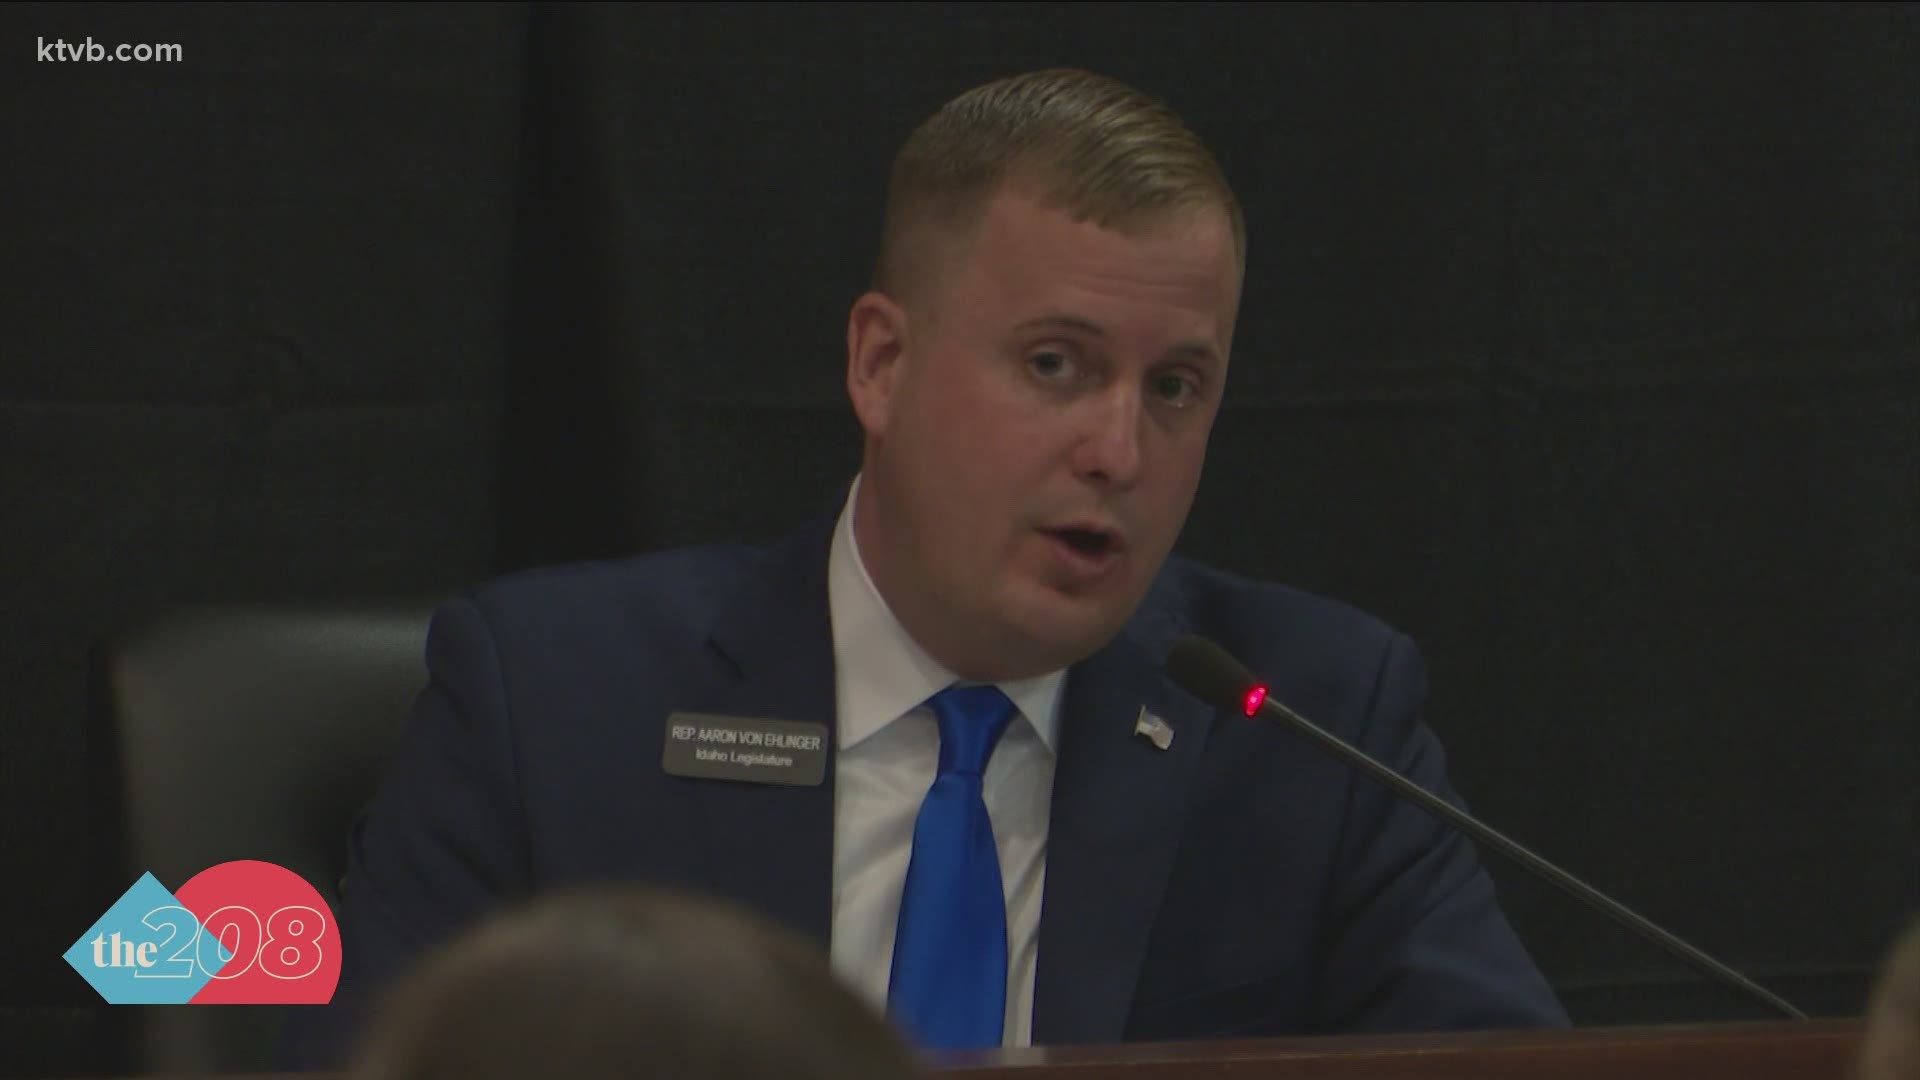 Aaron von Ehlinger's fellow lawmakers will determine whether he acted inappropriately, and can recommend sanctions including expulsion from the Legislature.